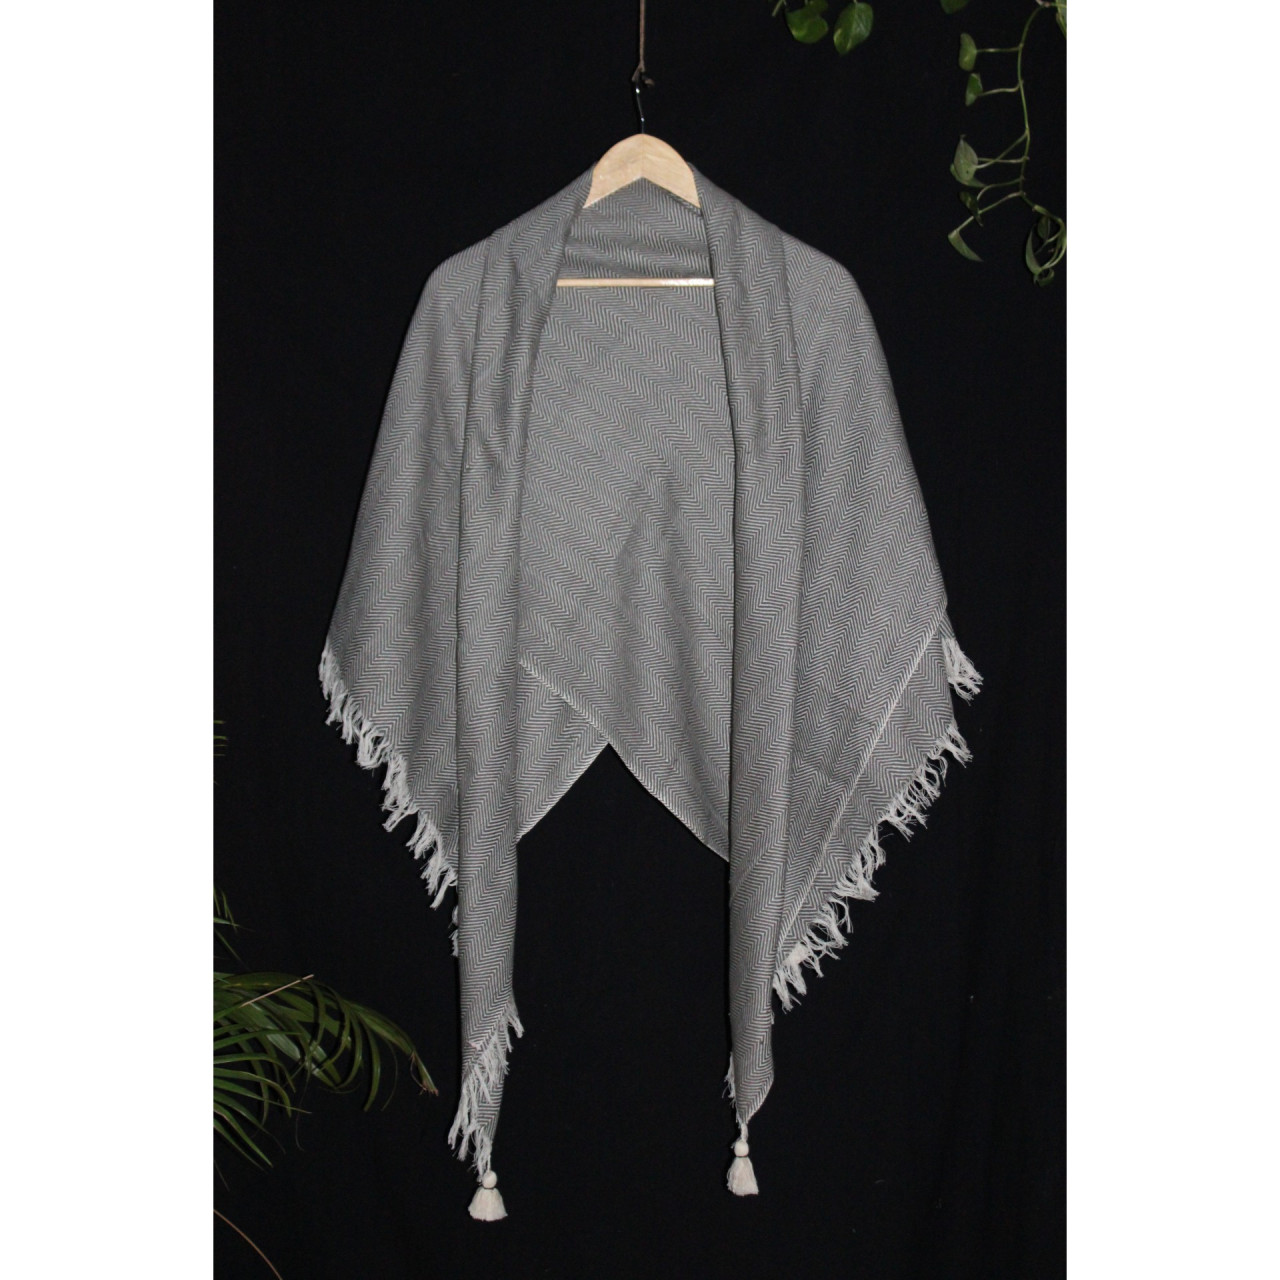 (1432) Cotton and khadi  Azo-free dyed throw from Bihar - Grey, white, pompoms, textured